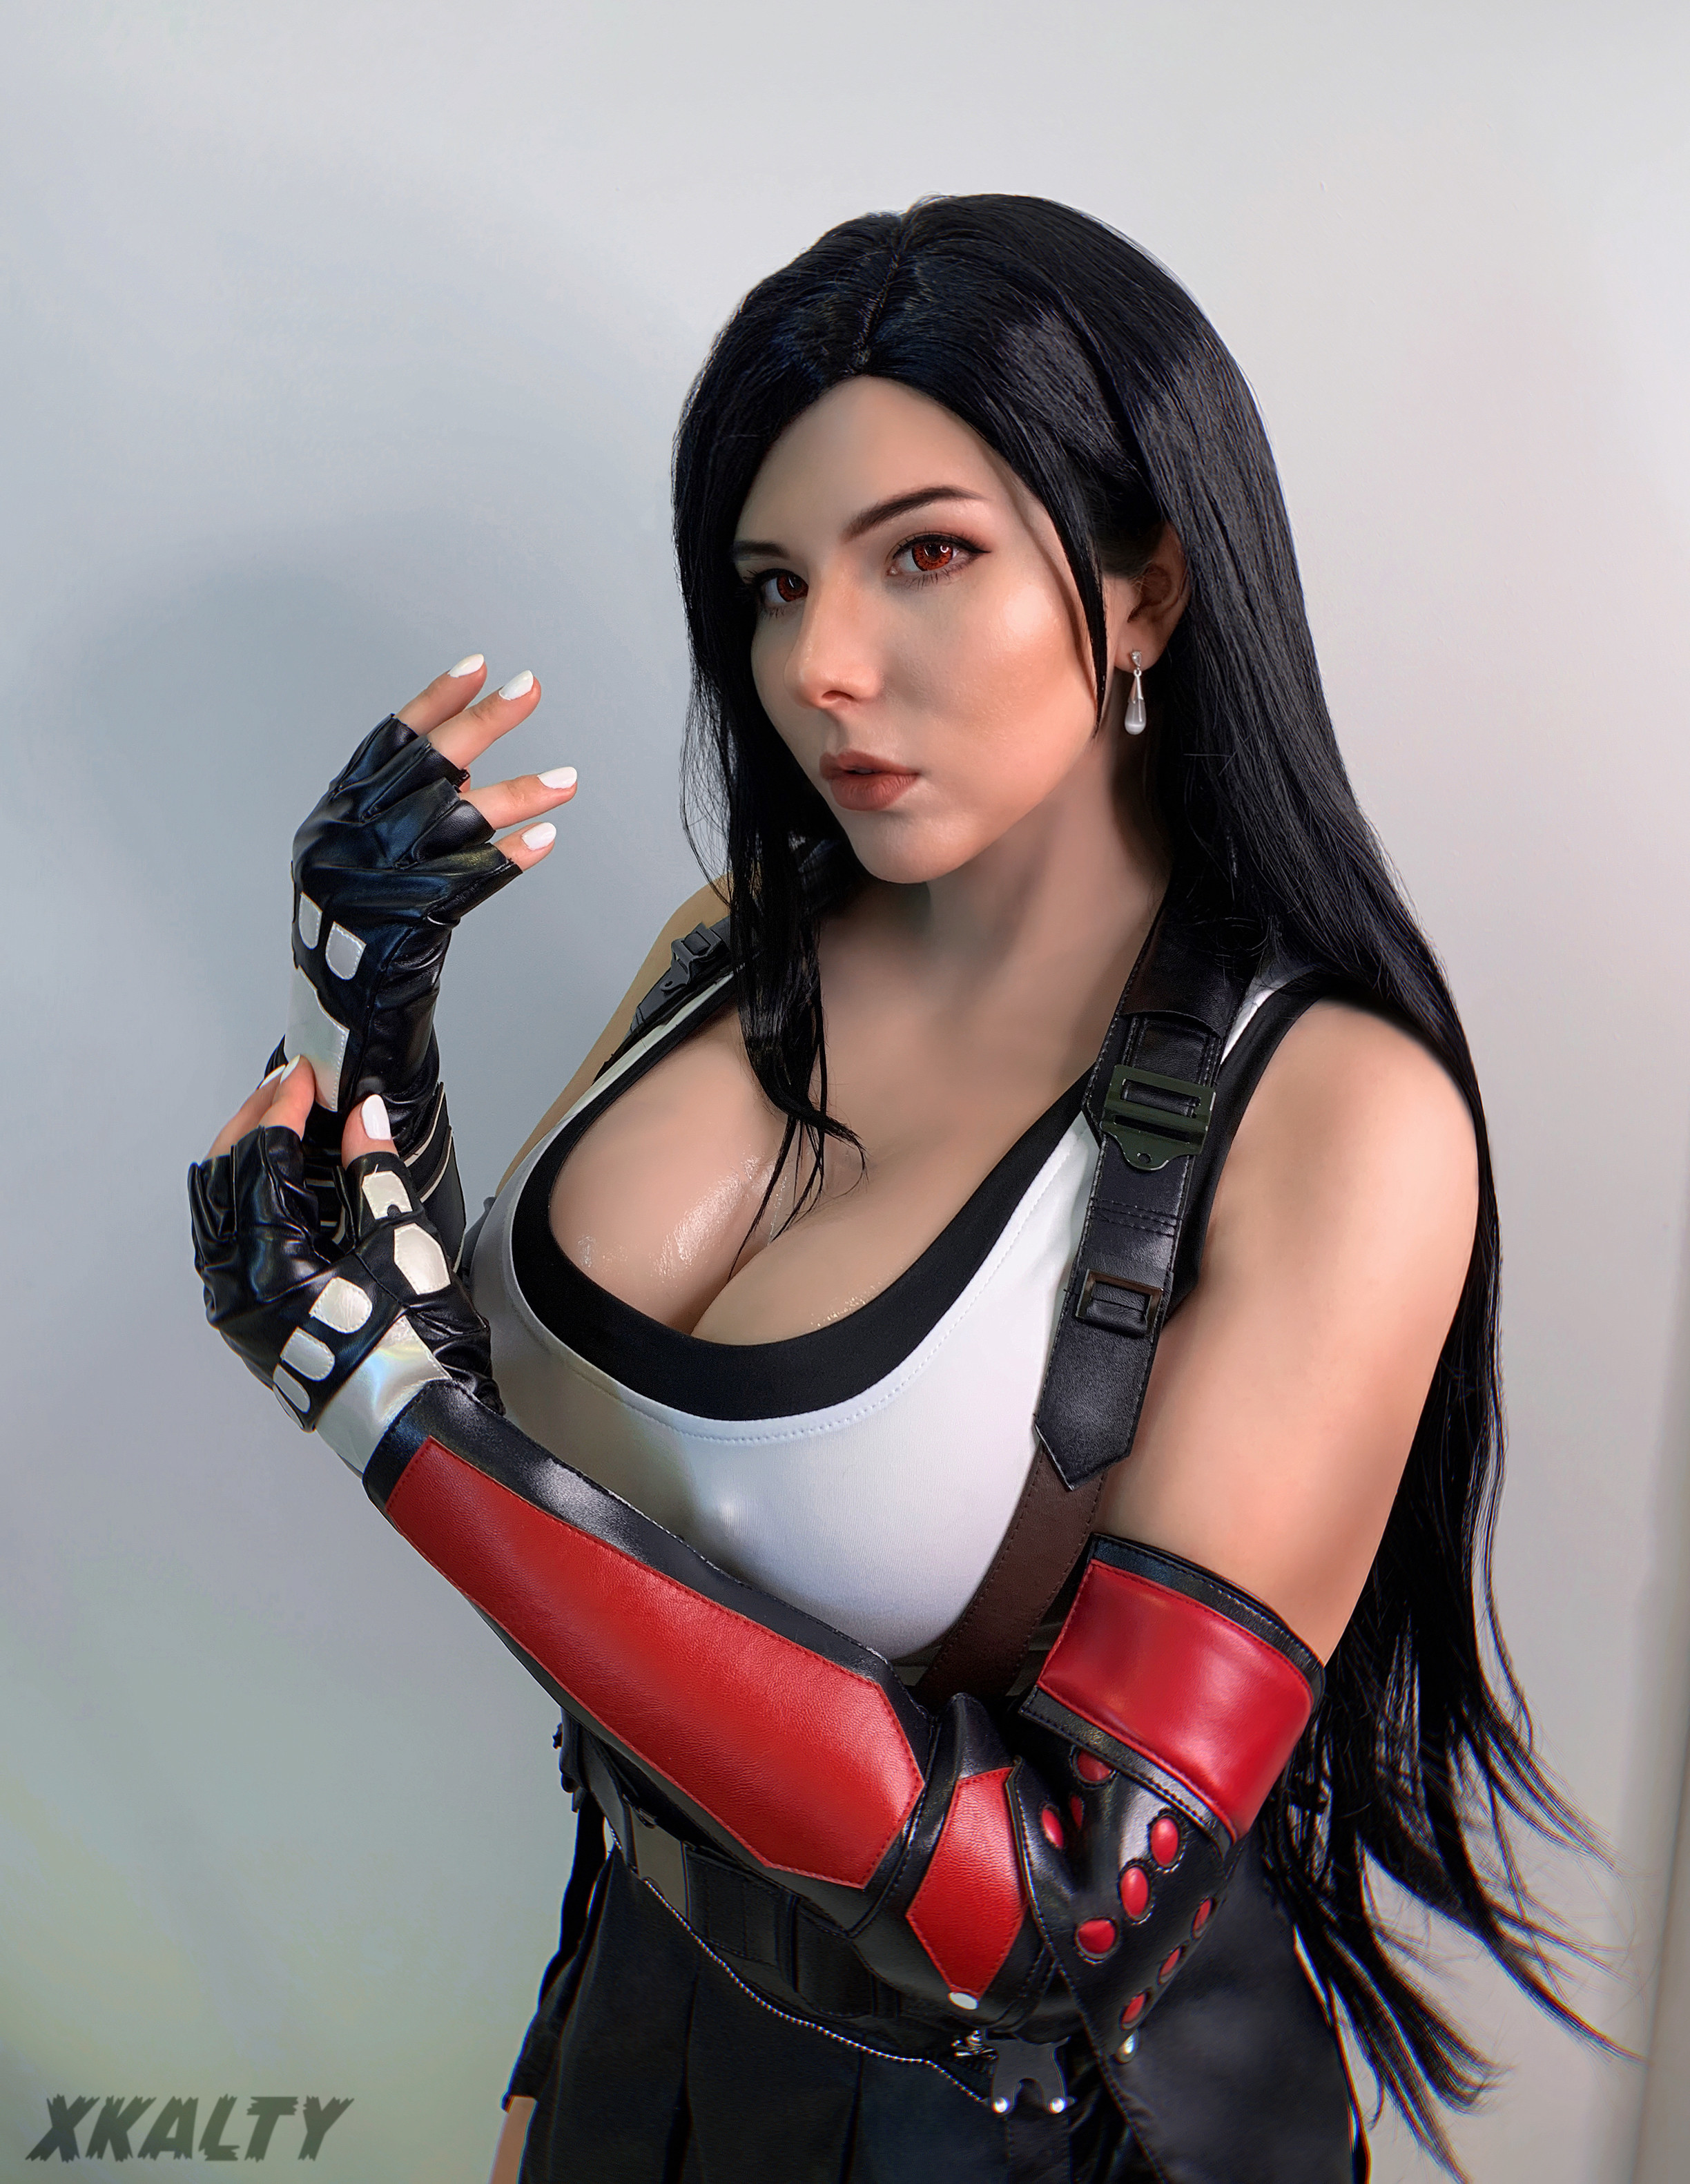 Big Boob Cosplay Girls Naked - View Big Tits Tifa >3 Love them? Nude Boobs i for free | Simply-Cosplay